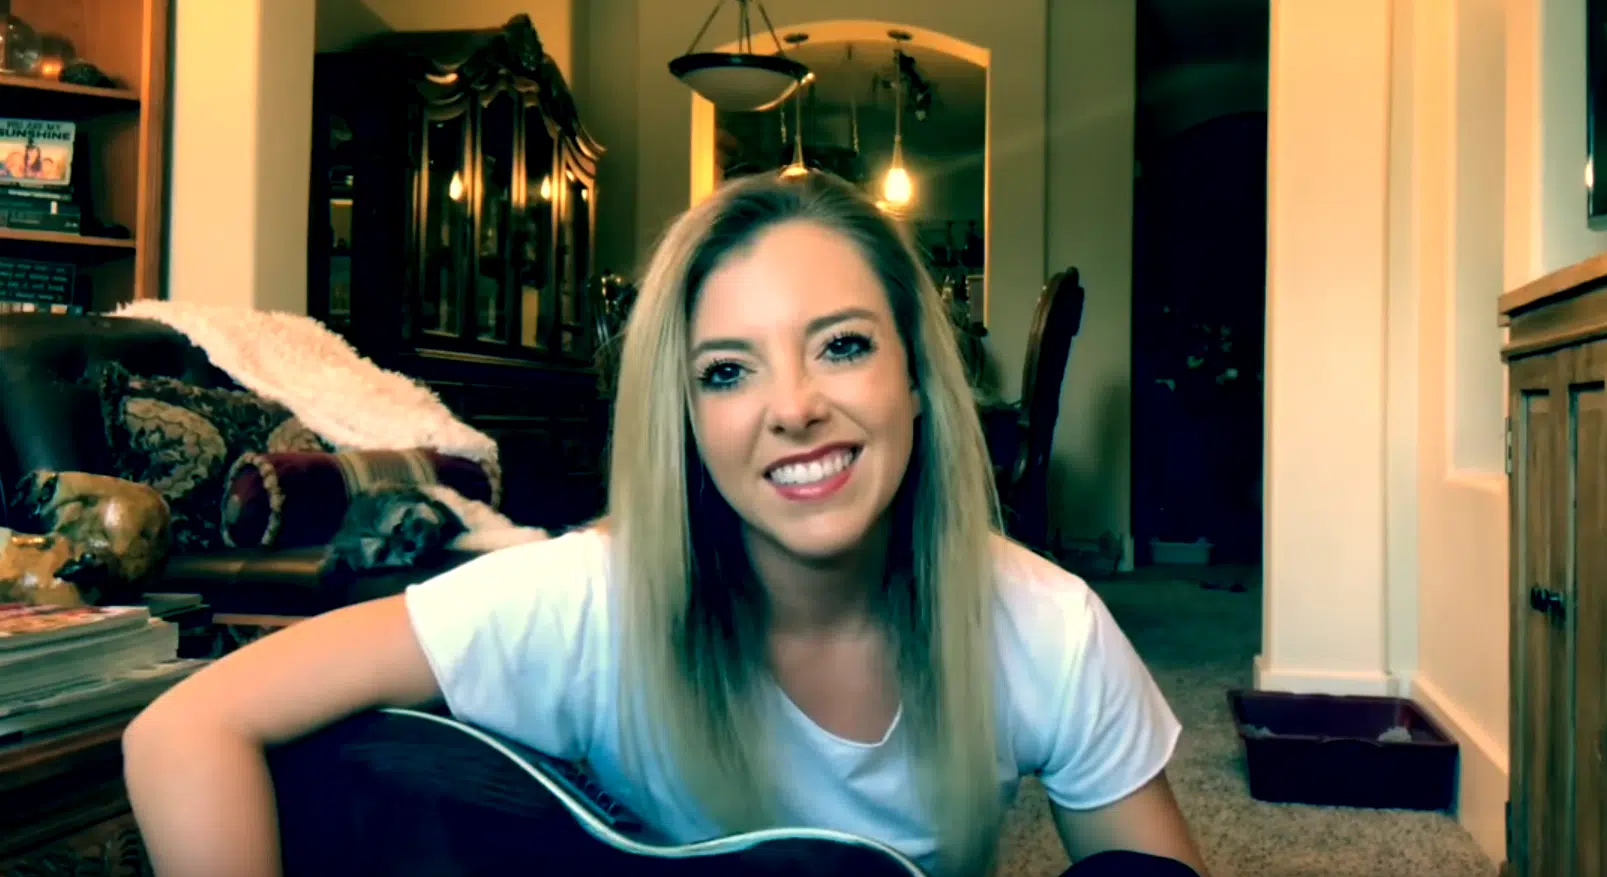 Must Hear! Girl Rewrites "When It Rains It Pours" from the Angry GF's Perspective